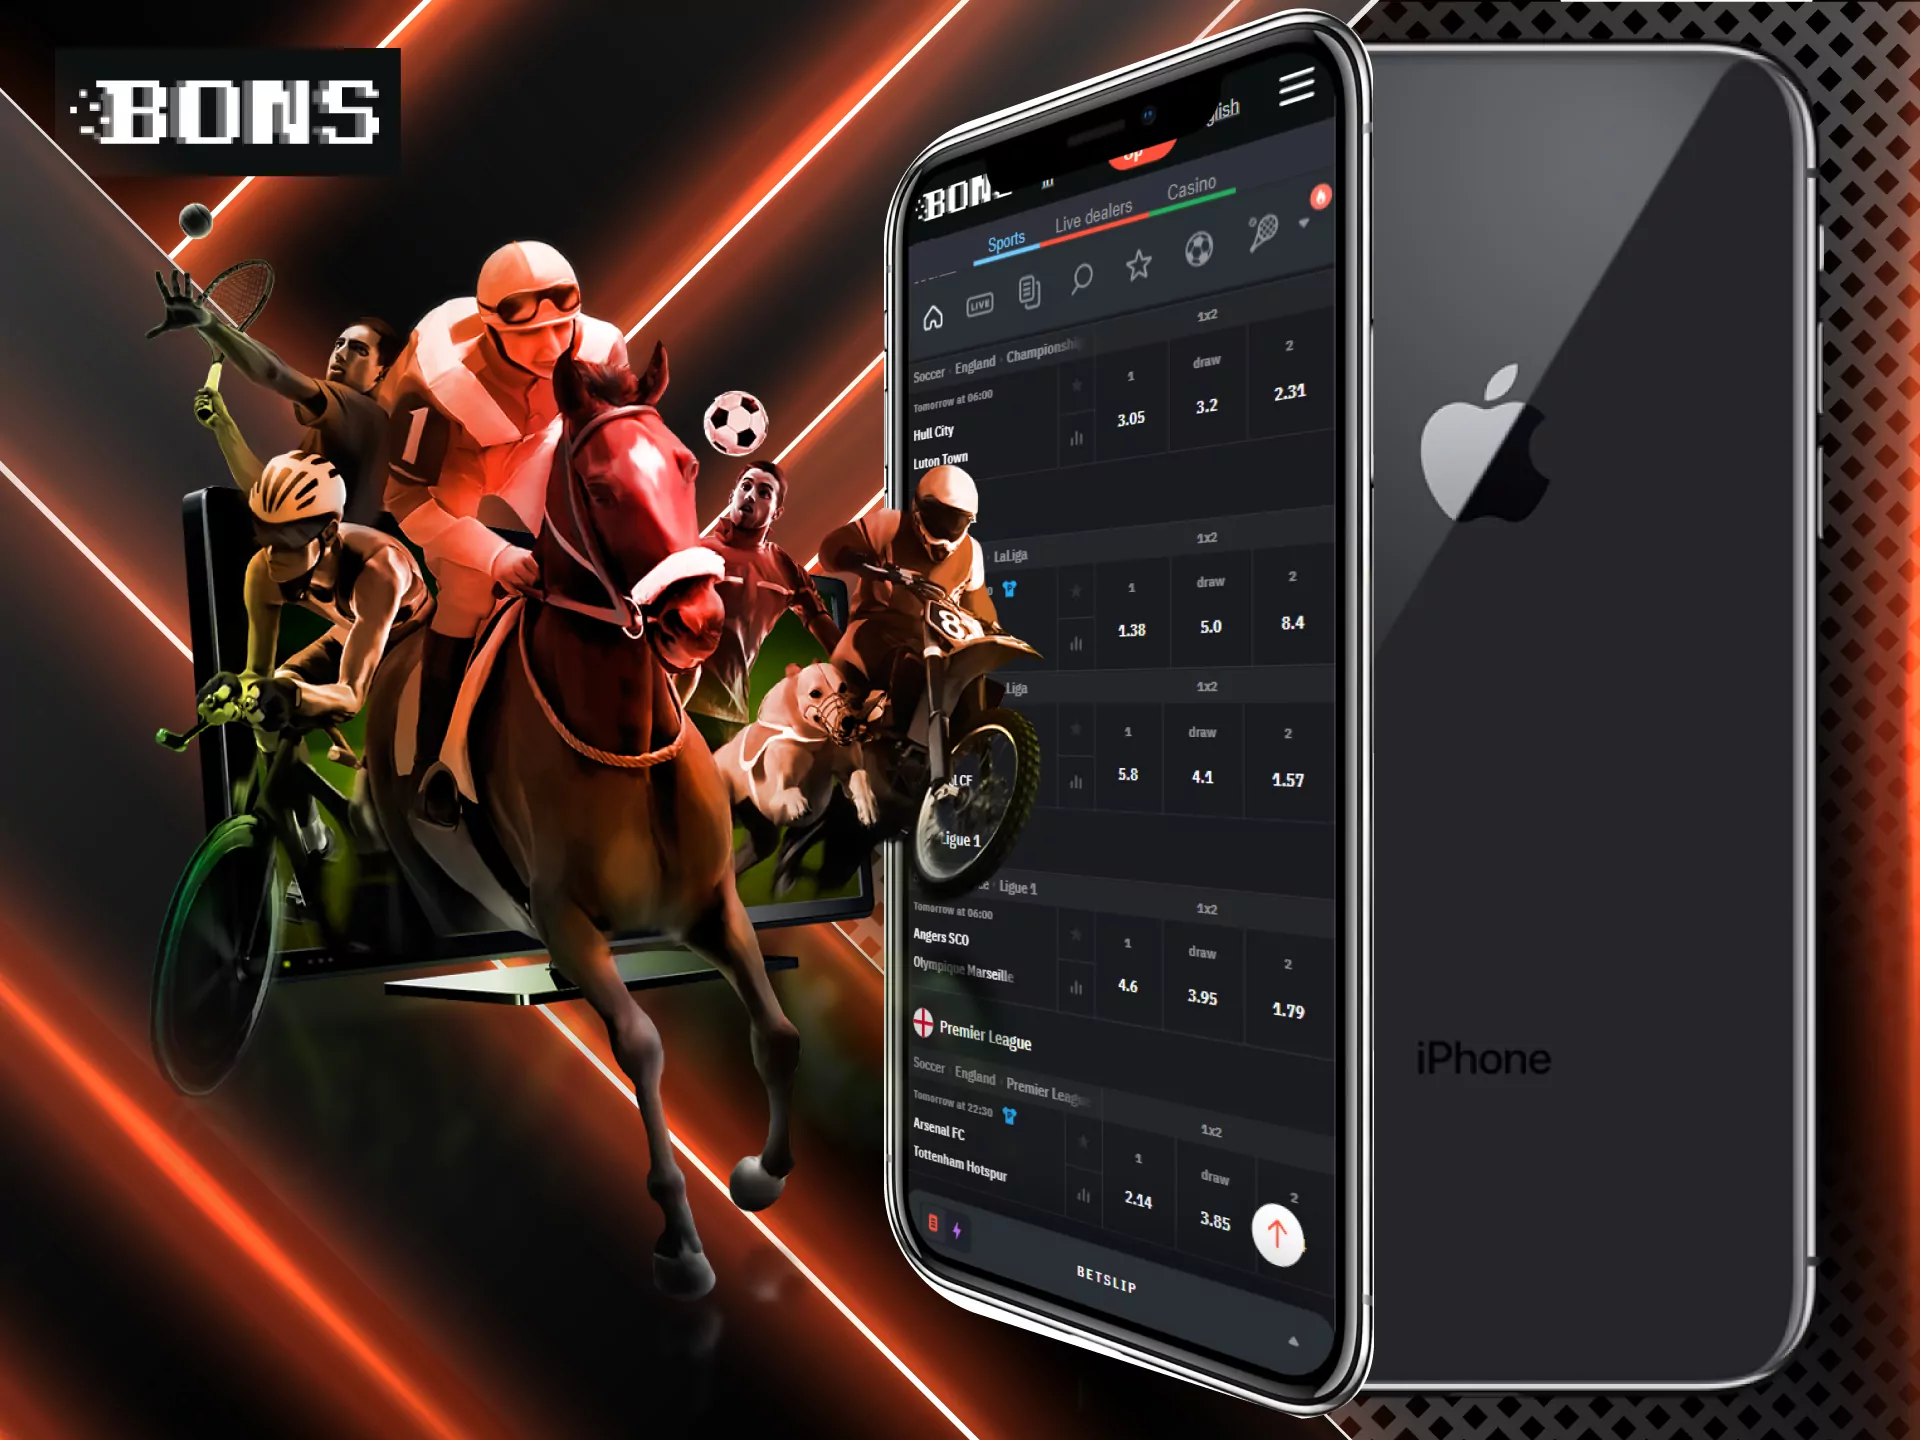 Sign up for Bons and get an access to the profitable sportsbook and great casino games.